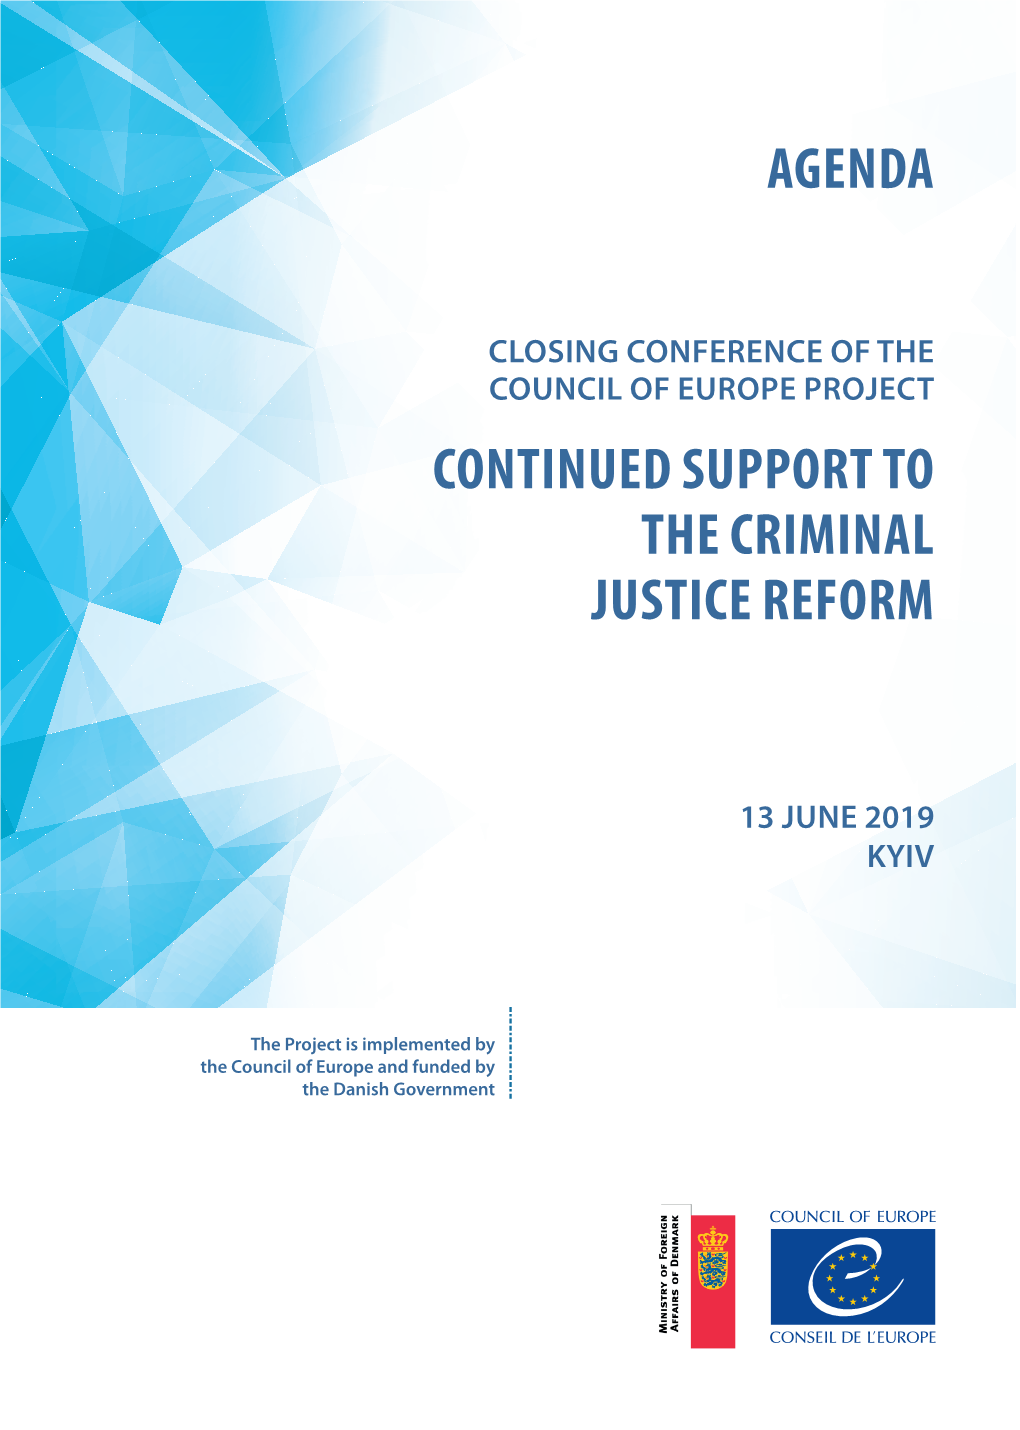 Closing Conference of the Council of Europe Project Continued Support to the Criminal Justice Reform